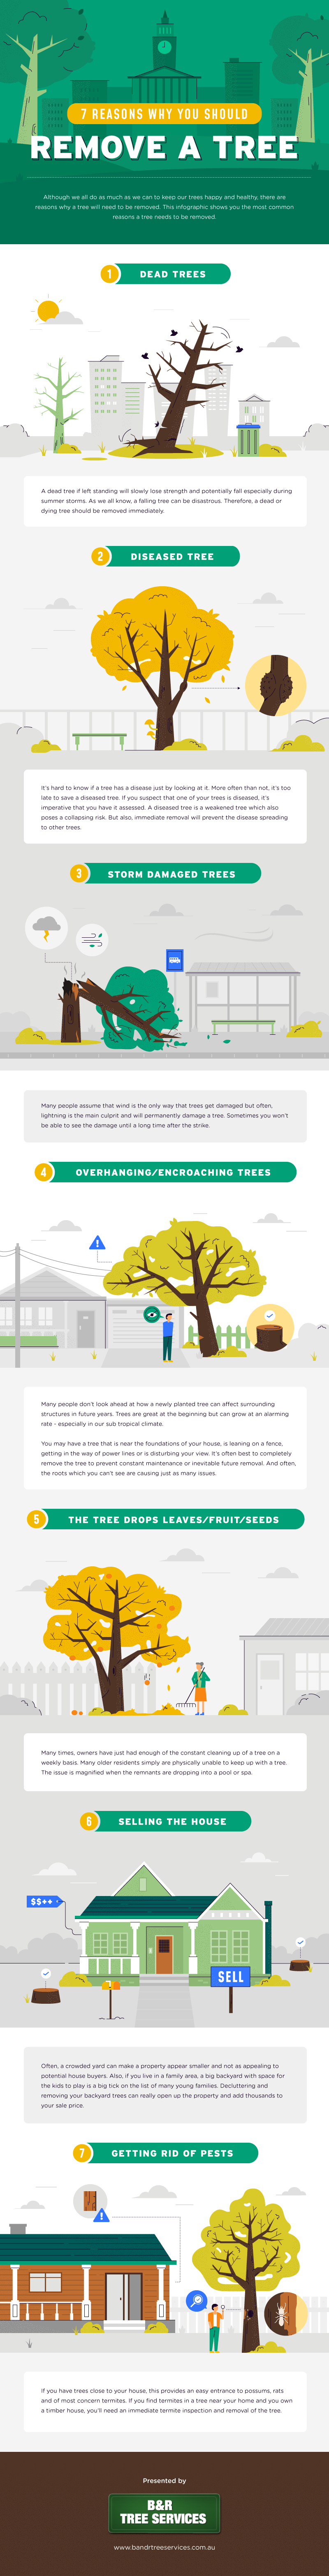 yes - 7 Reasons Why You Should Remove a Tree 3007-min